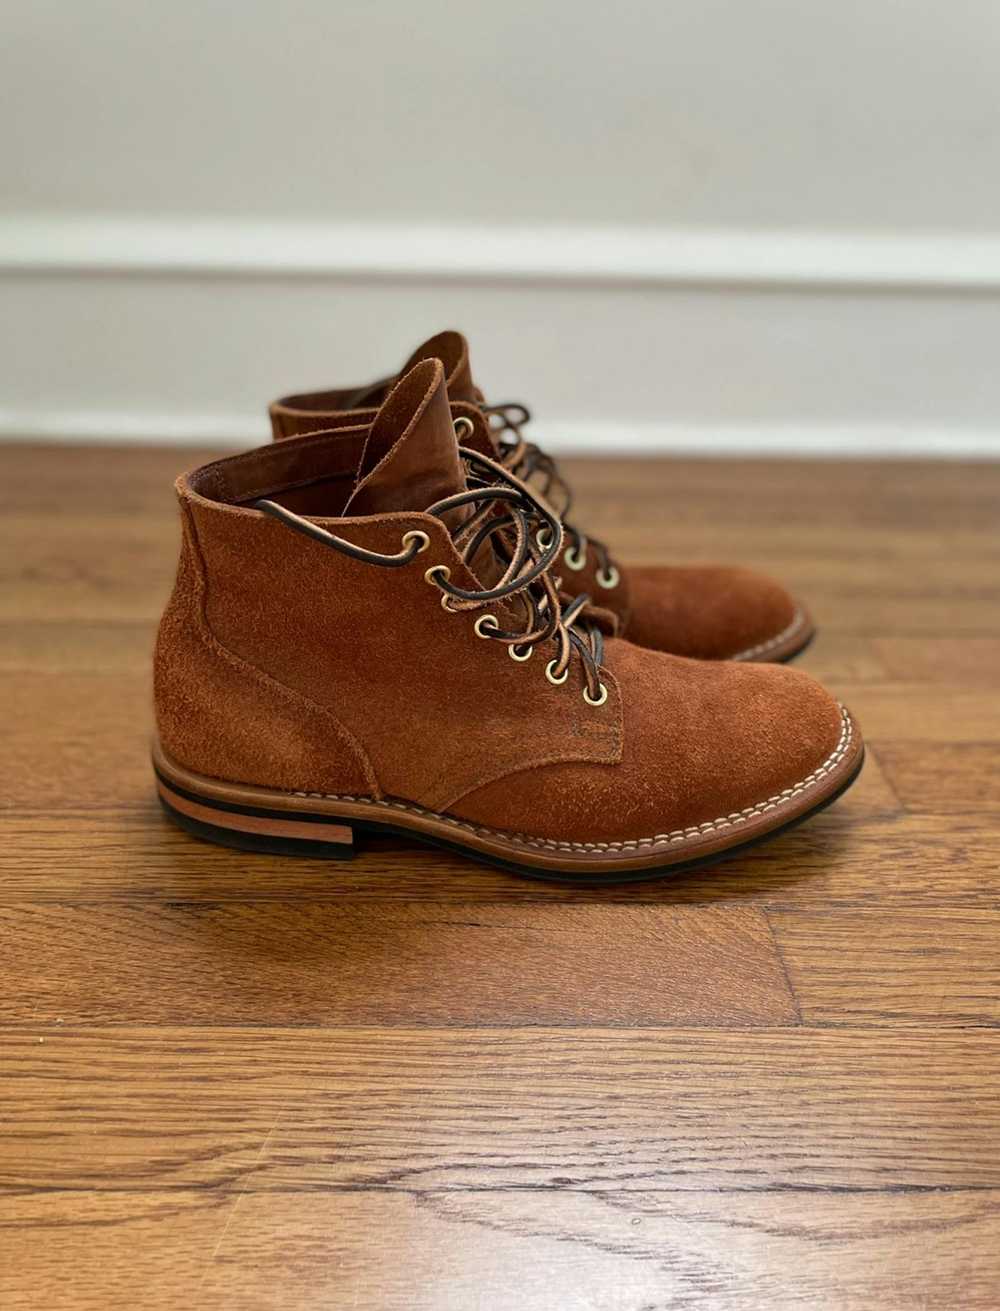 Viberg Viberg Service Boot in Aged Bark Roughout - image 1